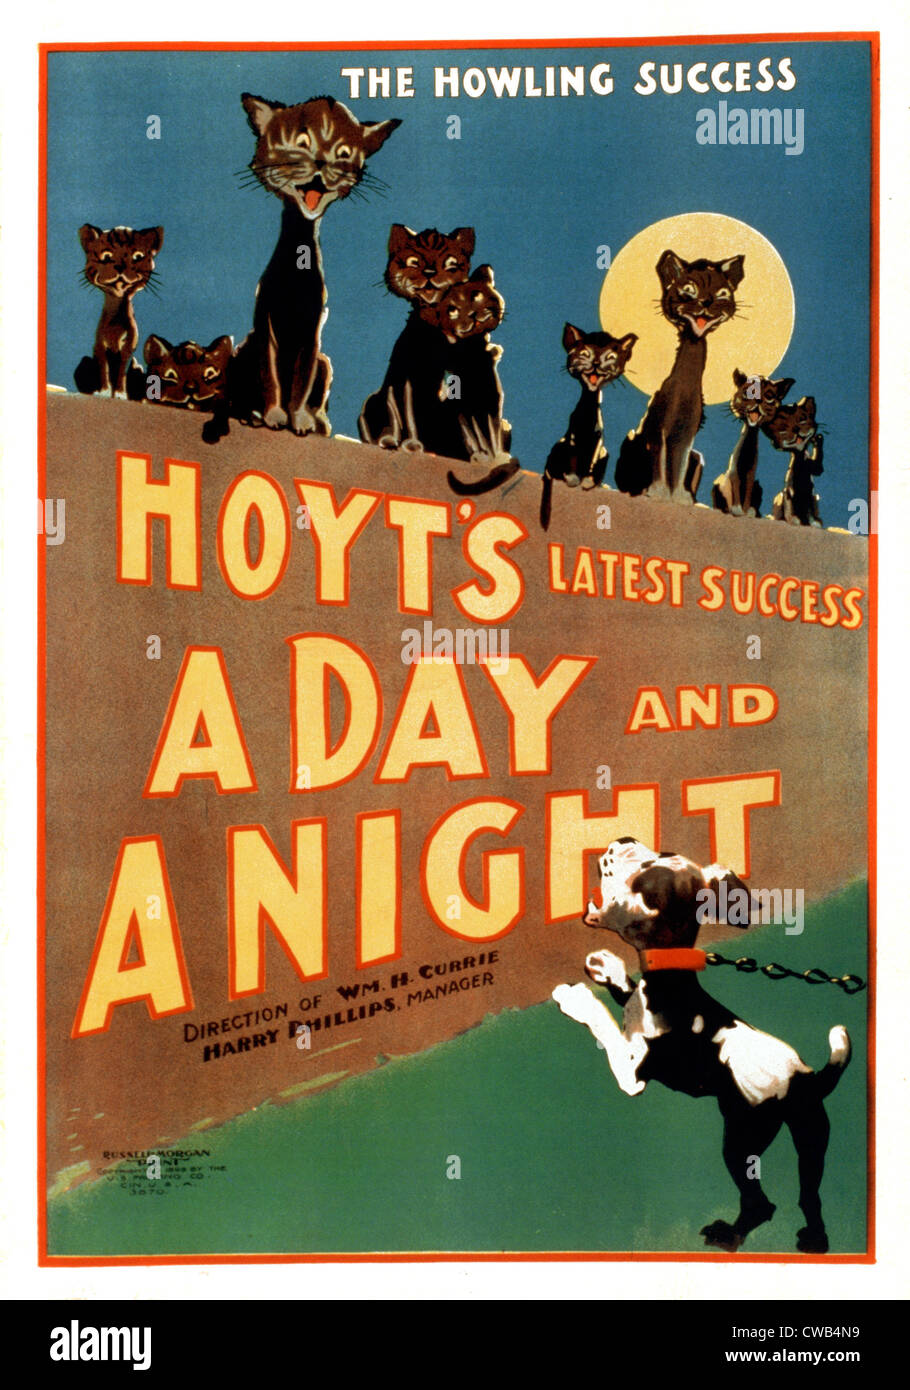 Hoyt's latest success, A Day and a Night the Howling Success, lithograph, poster for the play by Charles Hale Hoyt, circa 1899. Stock Photo